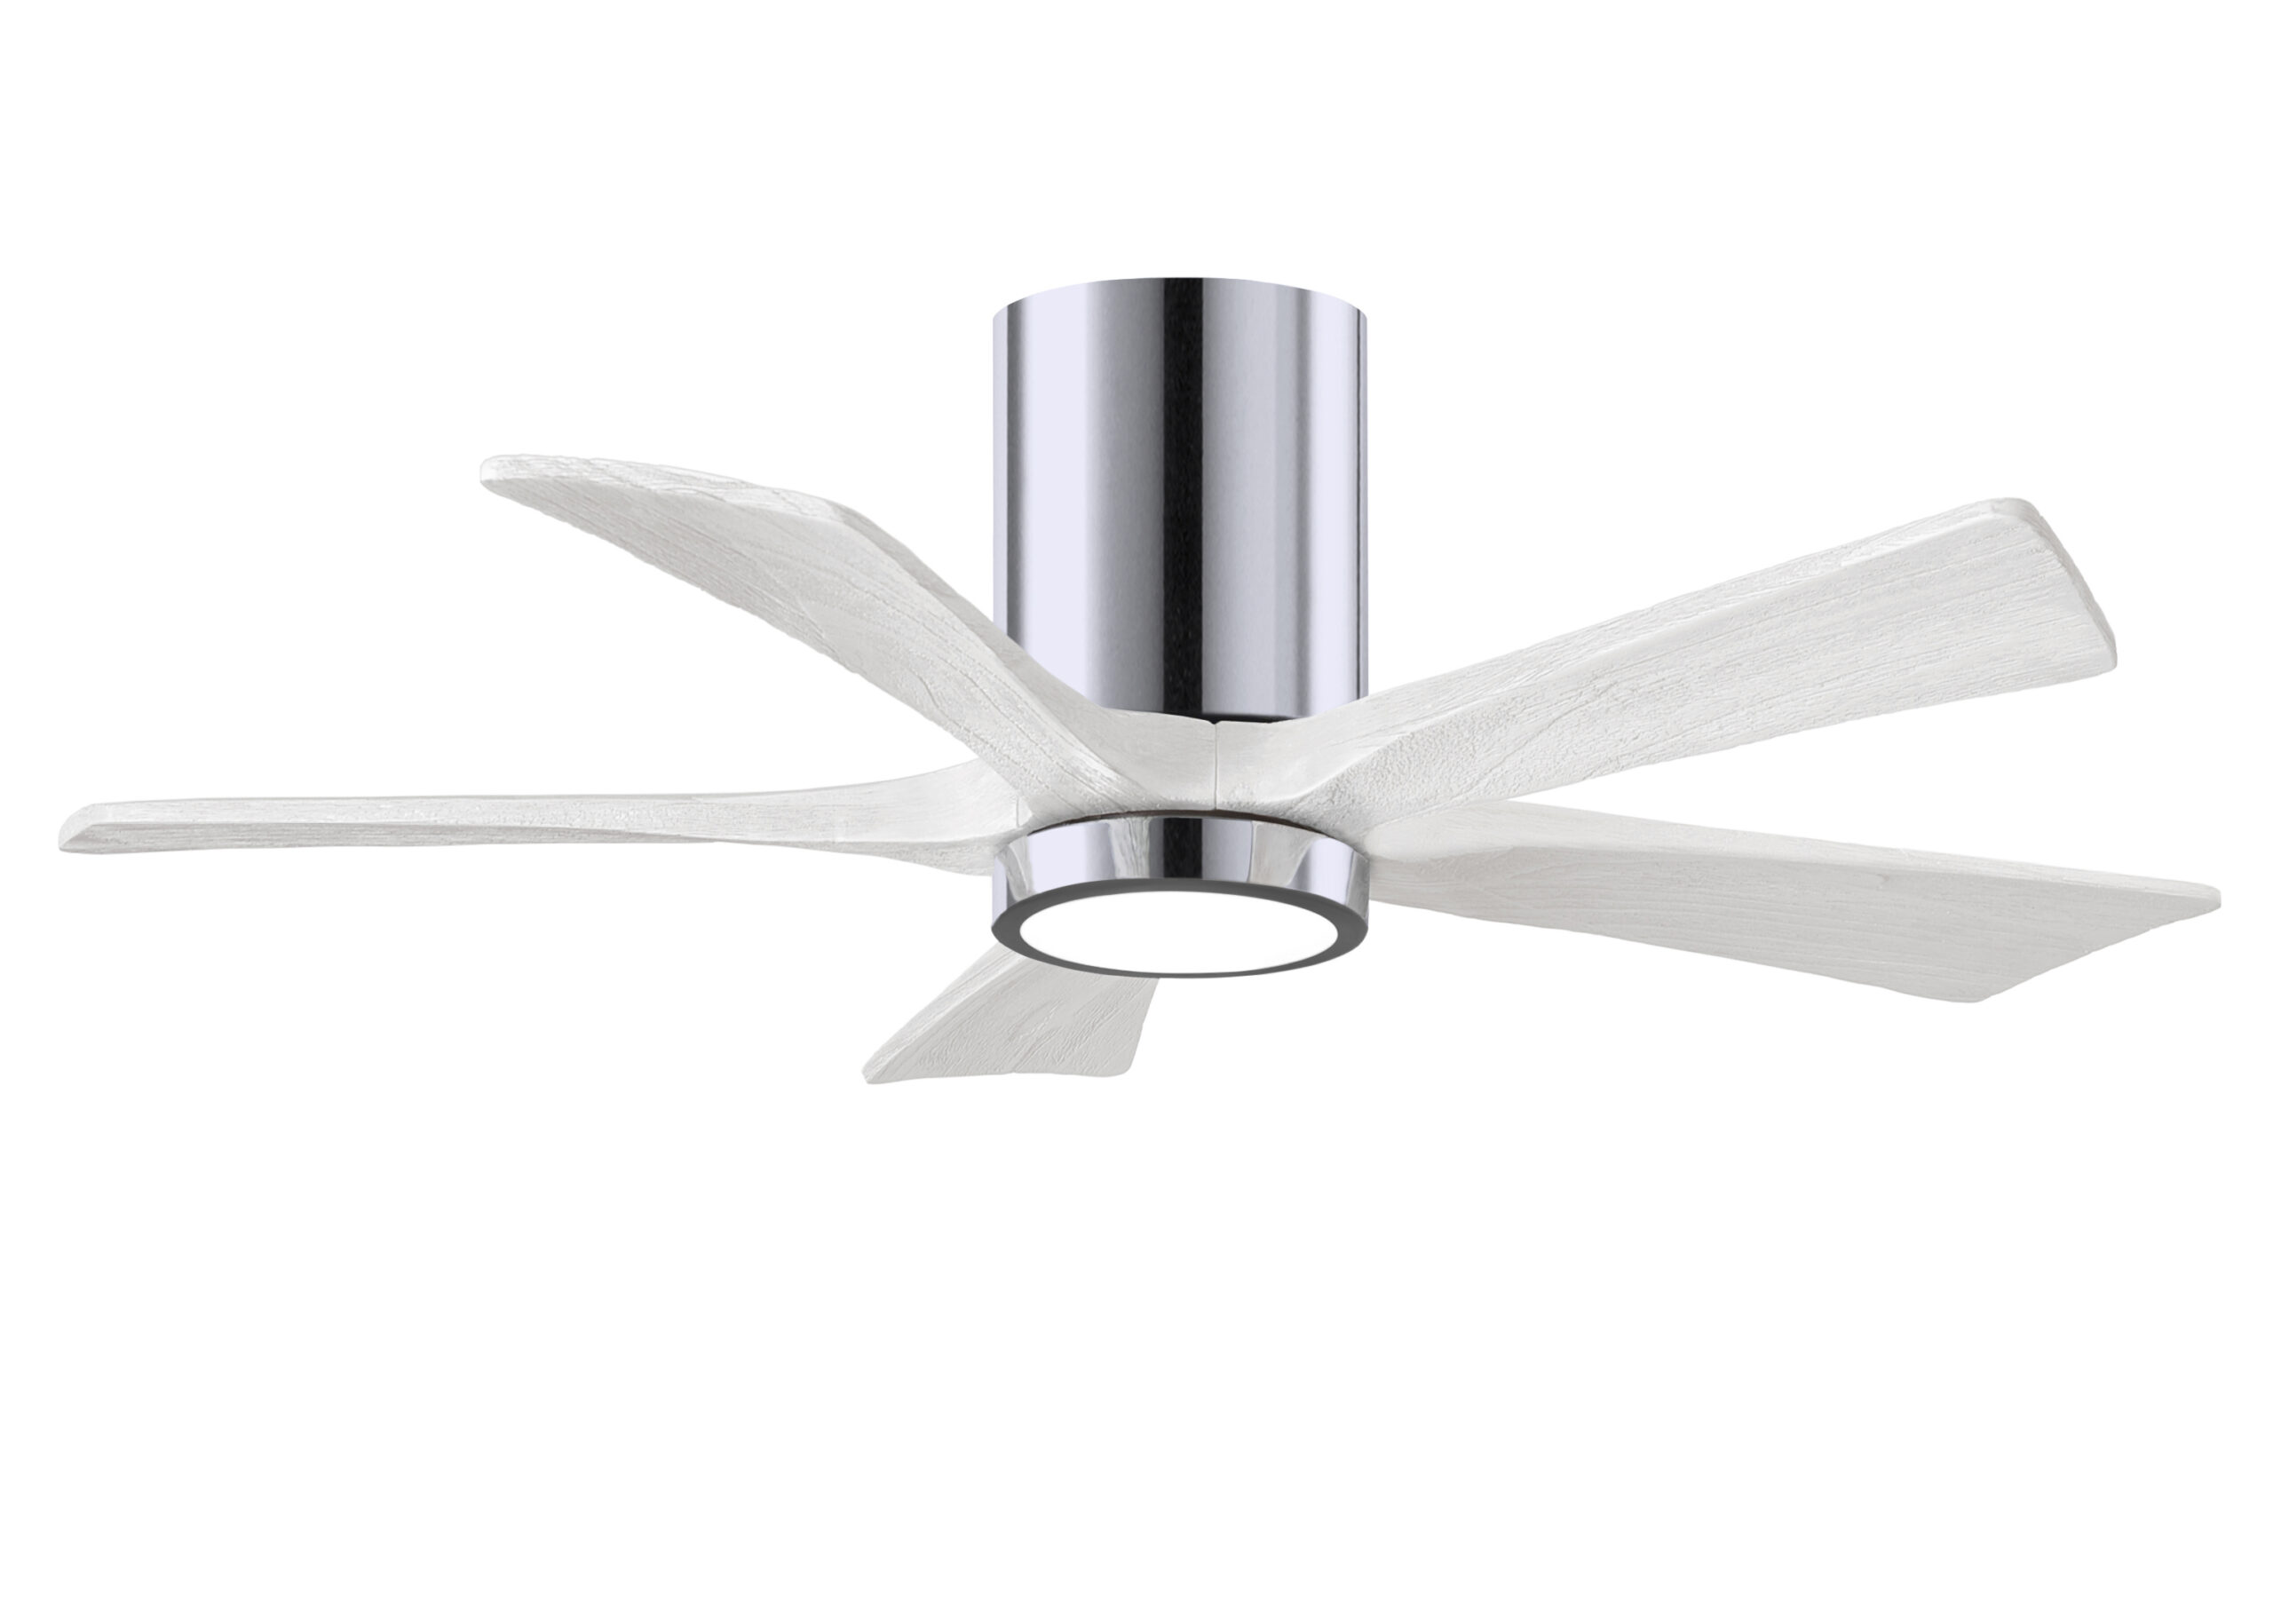 Irene-5HLK Ceiling Fan in Polished Chrome Finish with 42